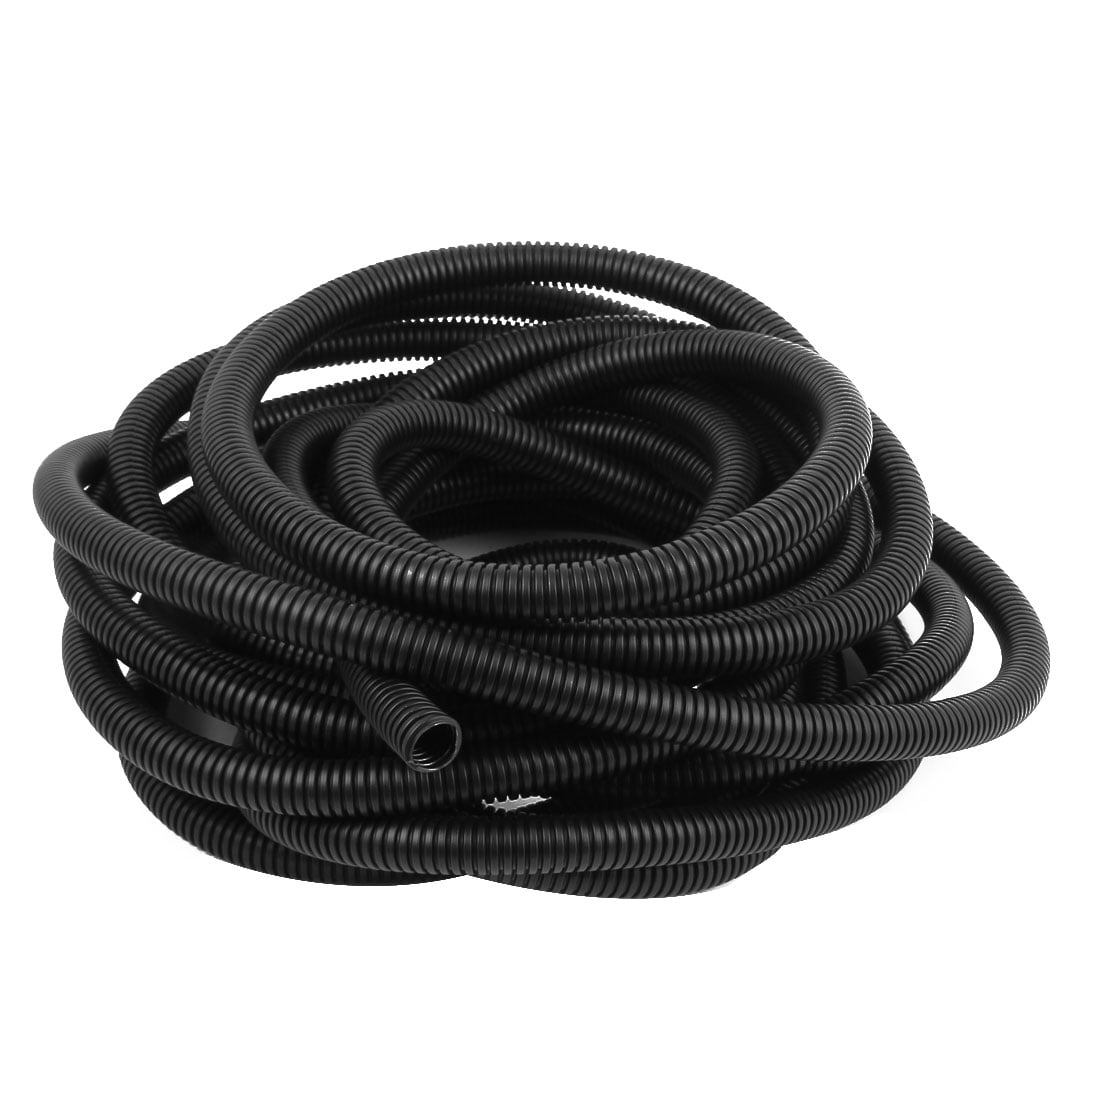 uxcell 10 M 7 x 10 mm Plastic Flexible Corrugated Conduit Tube for Garden,Office Black 